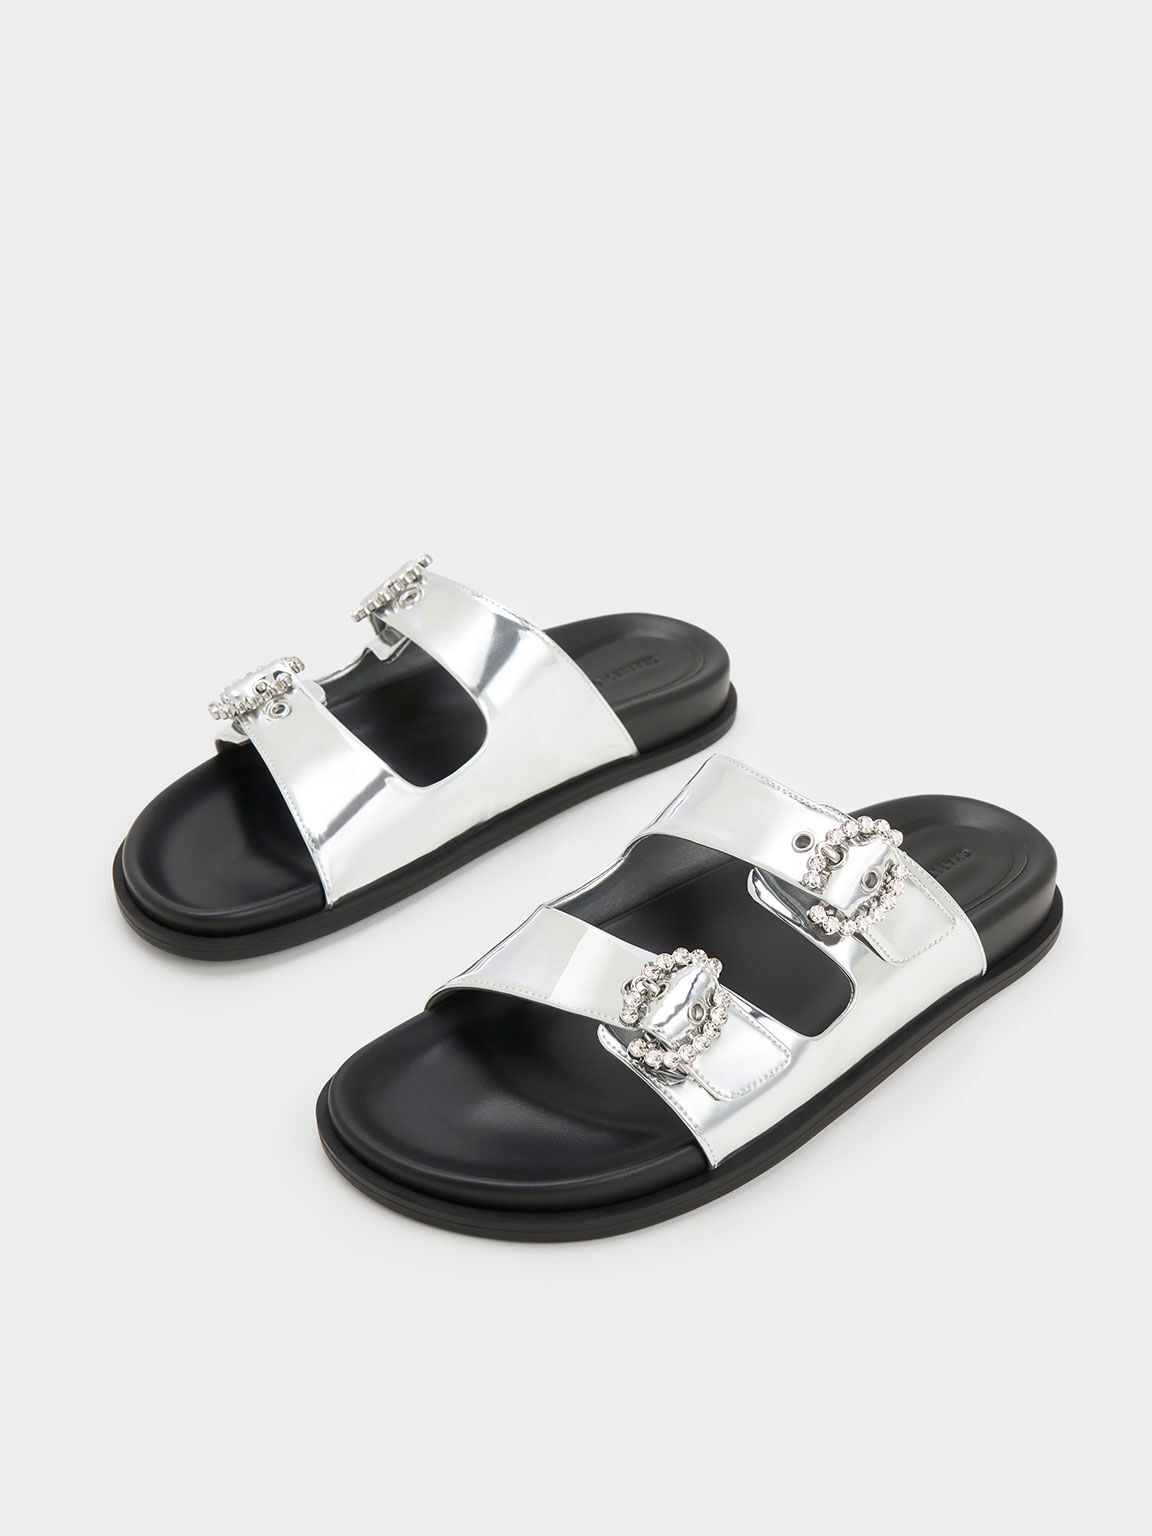 Silver Metallic Embellished Buckle Sandals - CHARLES & KEITH US